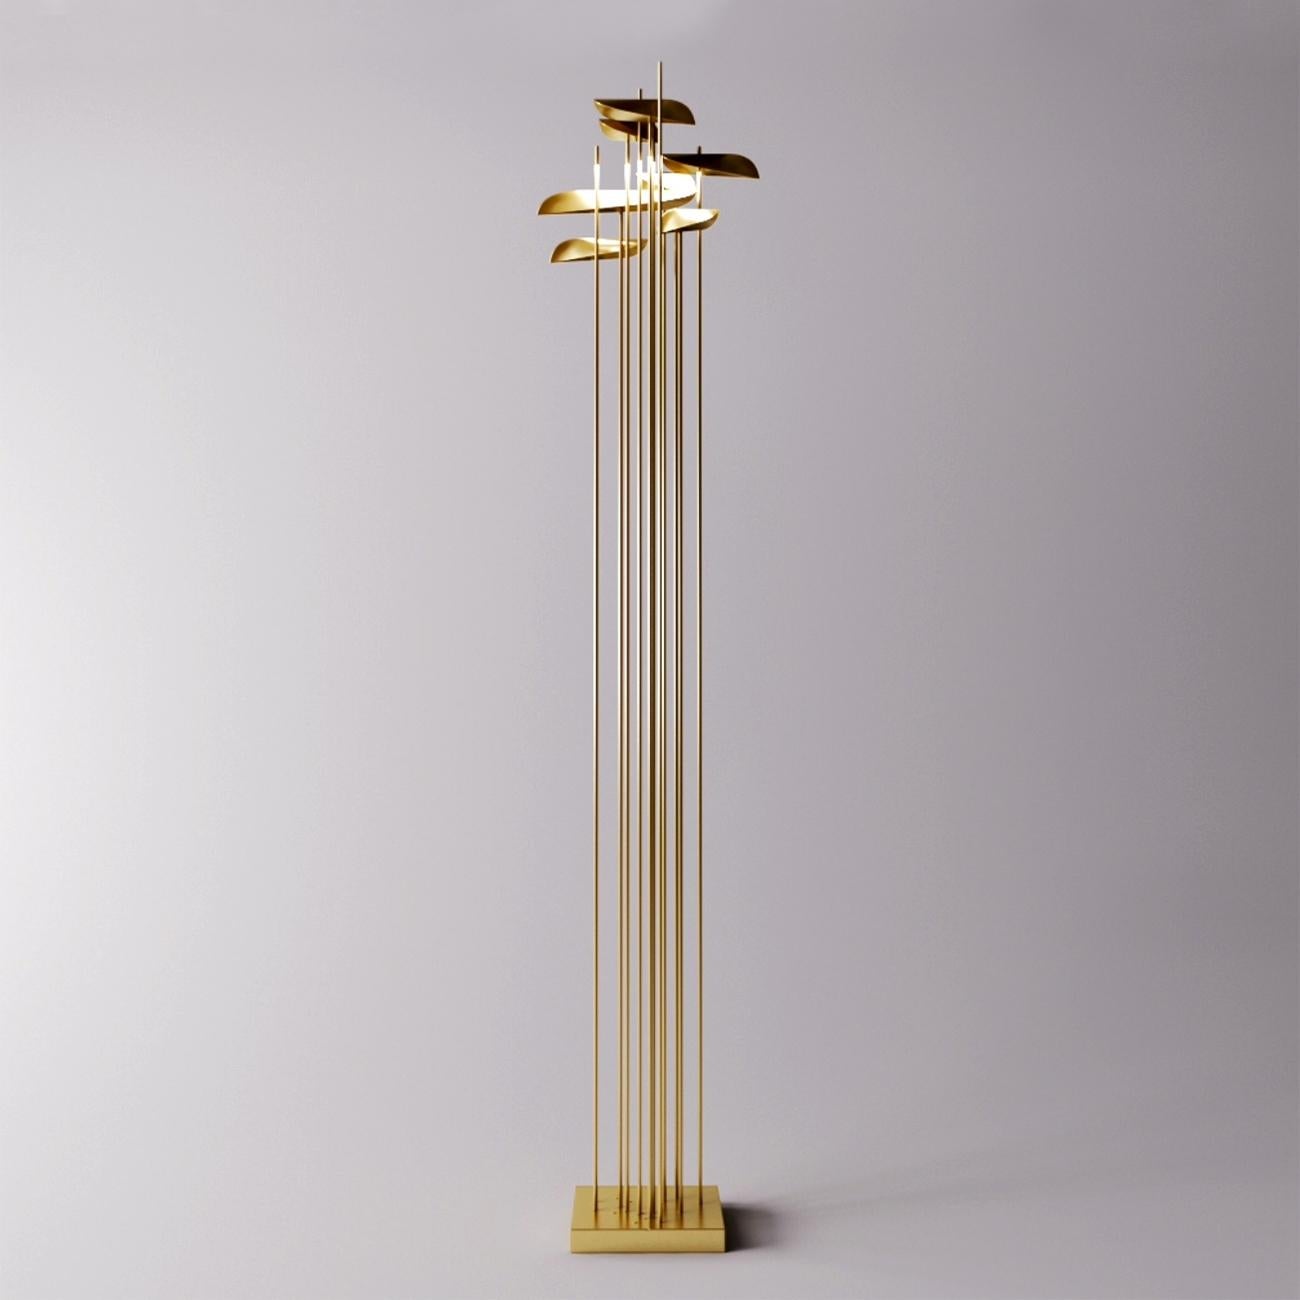 Floor Lamp Fins with polished brass rods on metal base
in gold finish. With brass shades in satinated finish. Power
LED light source, rated luminous flux: 5135 Lm, 3000° K.